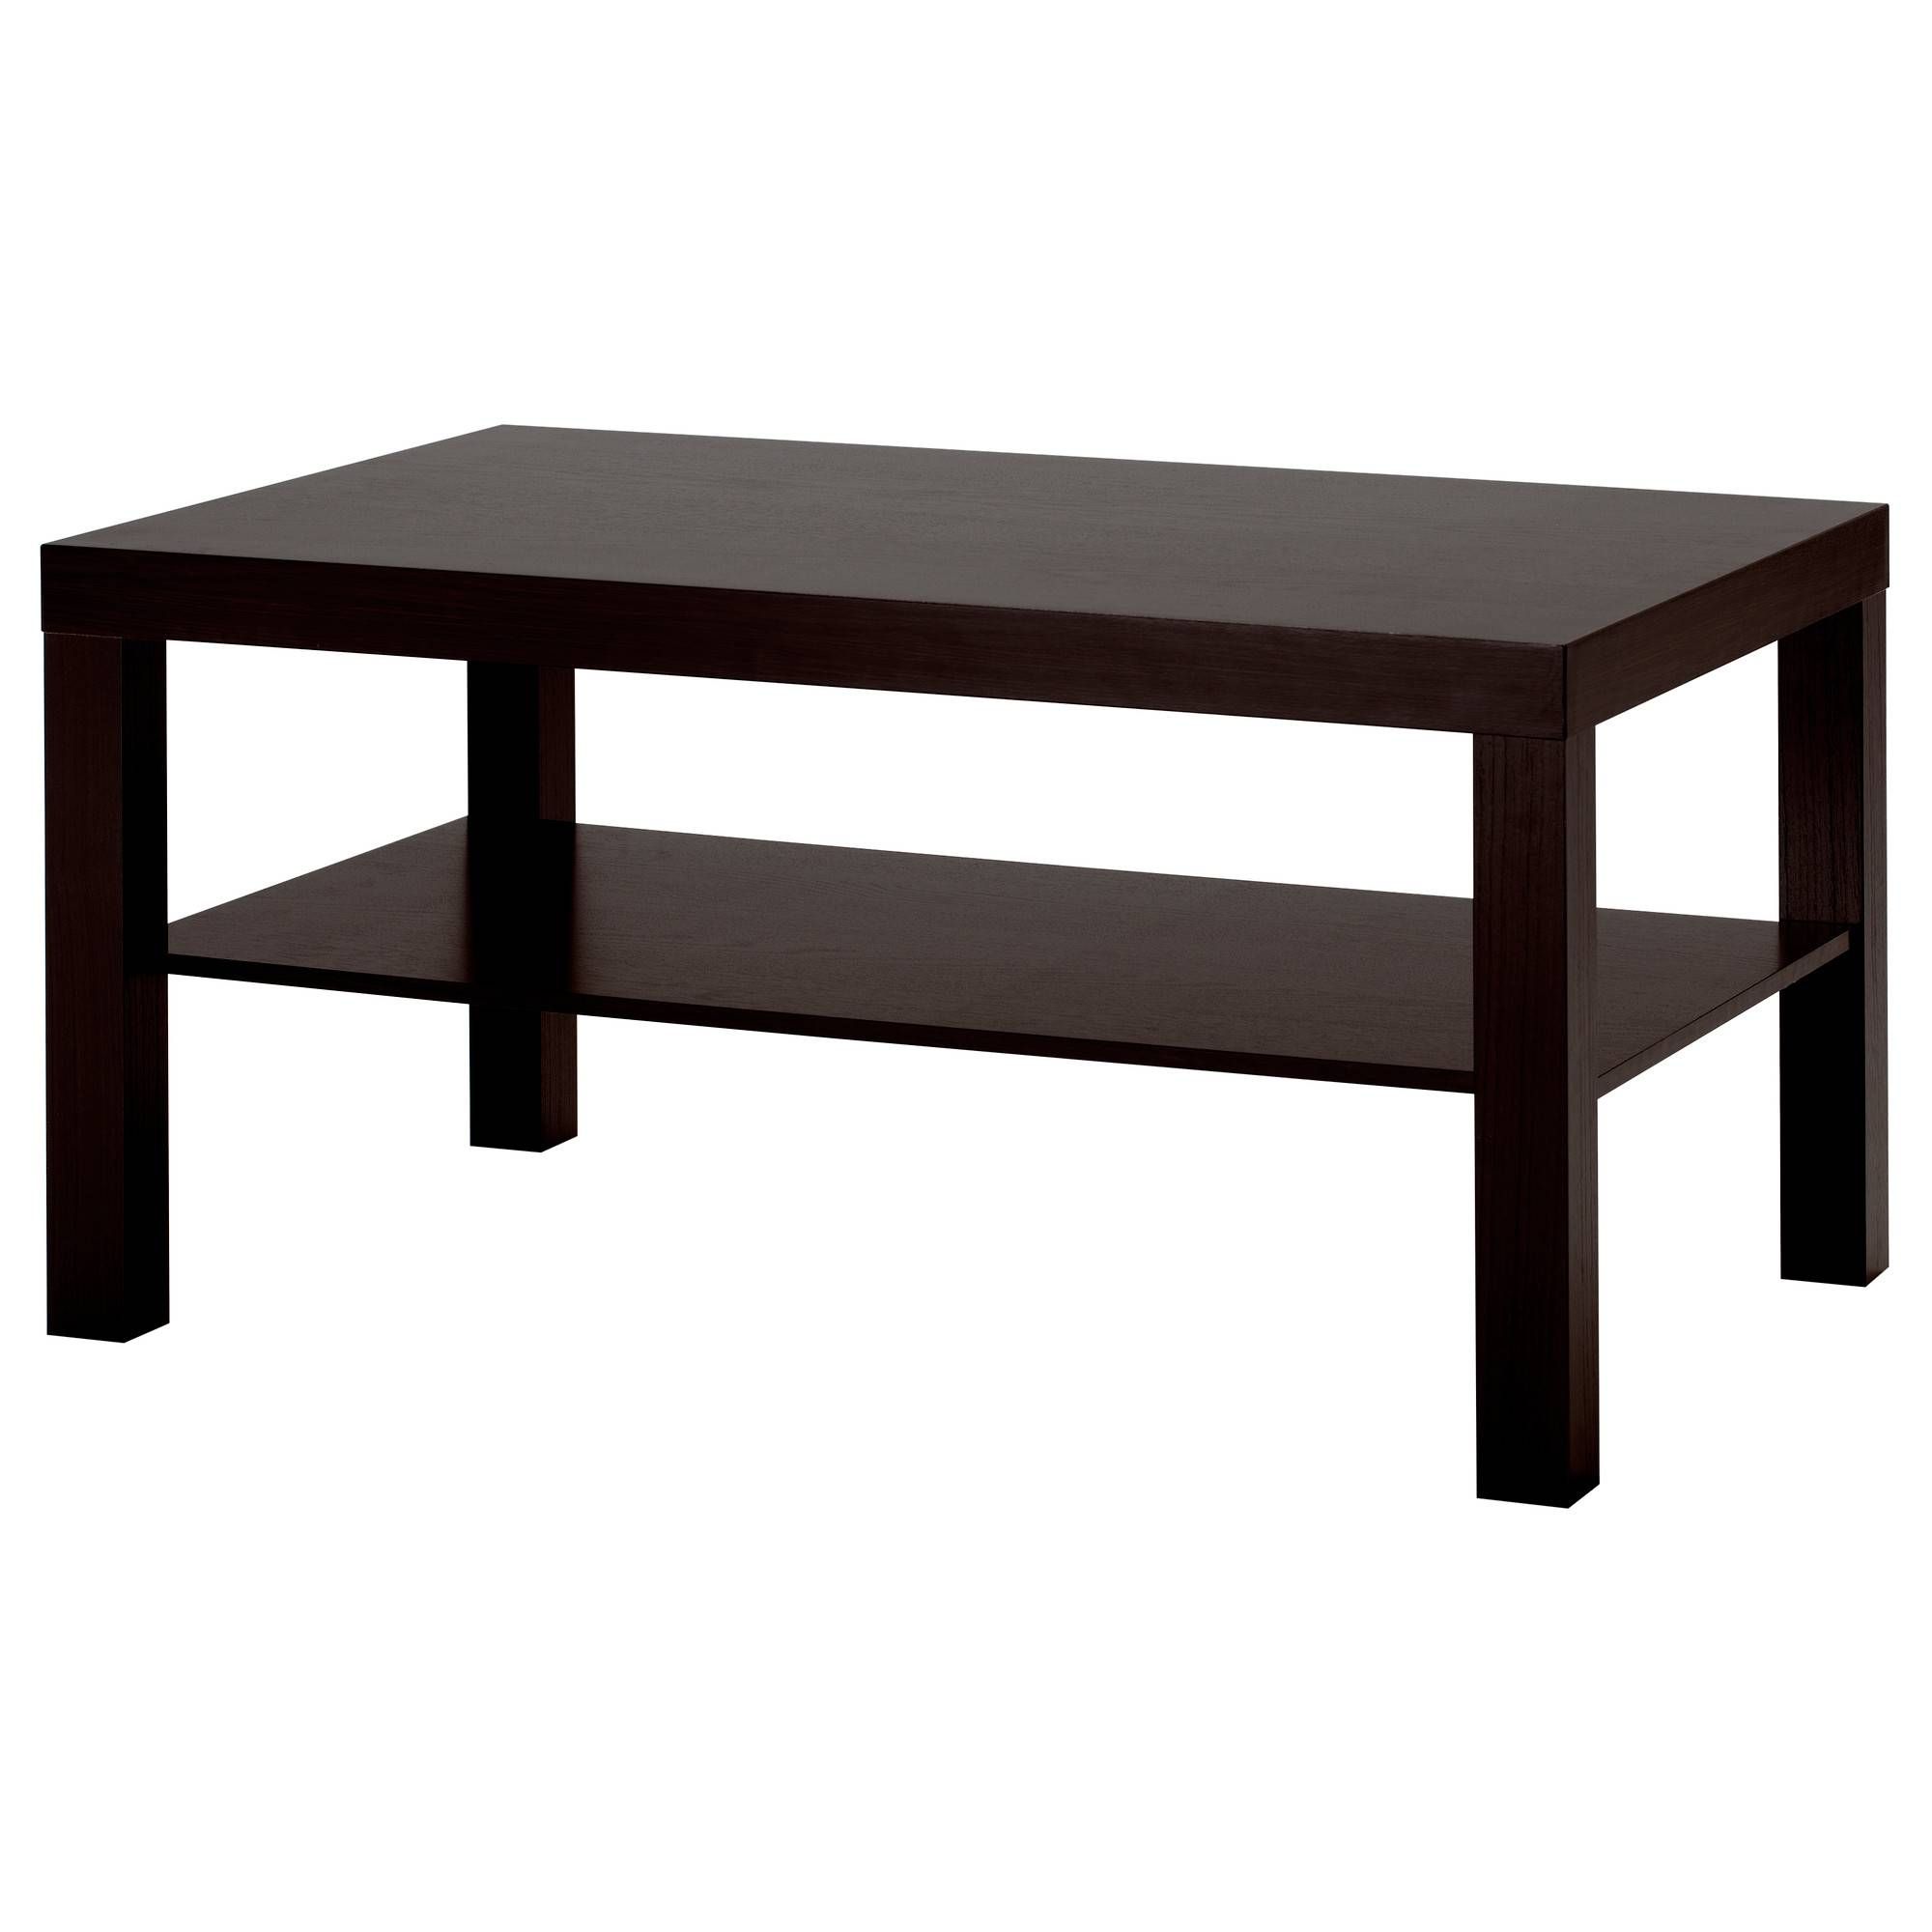 Lack Coffee Table – White, 35x22x18" – Ikea Within Low Height Coffee Tables (View 17 of 30)